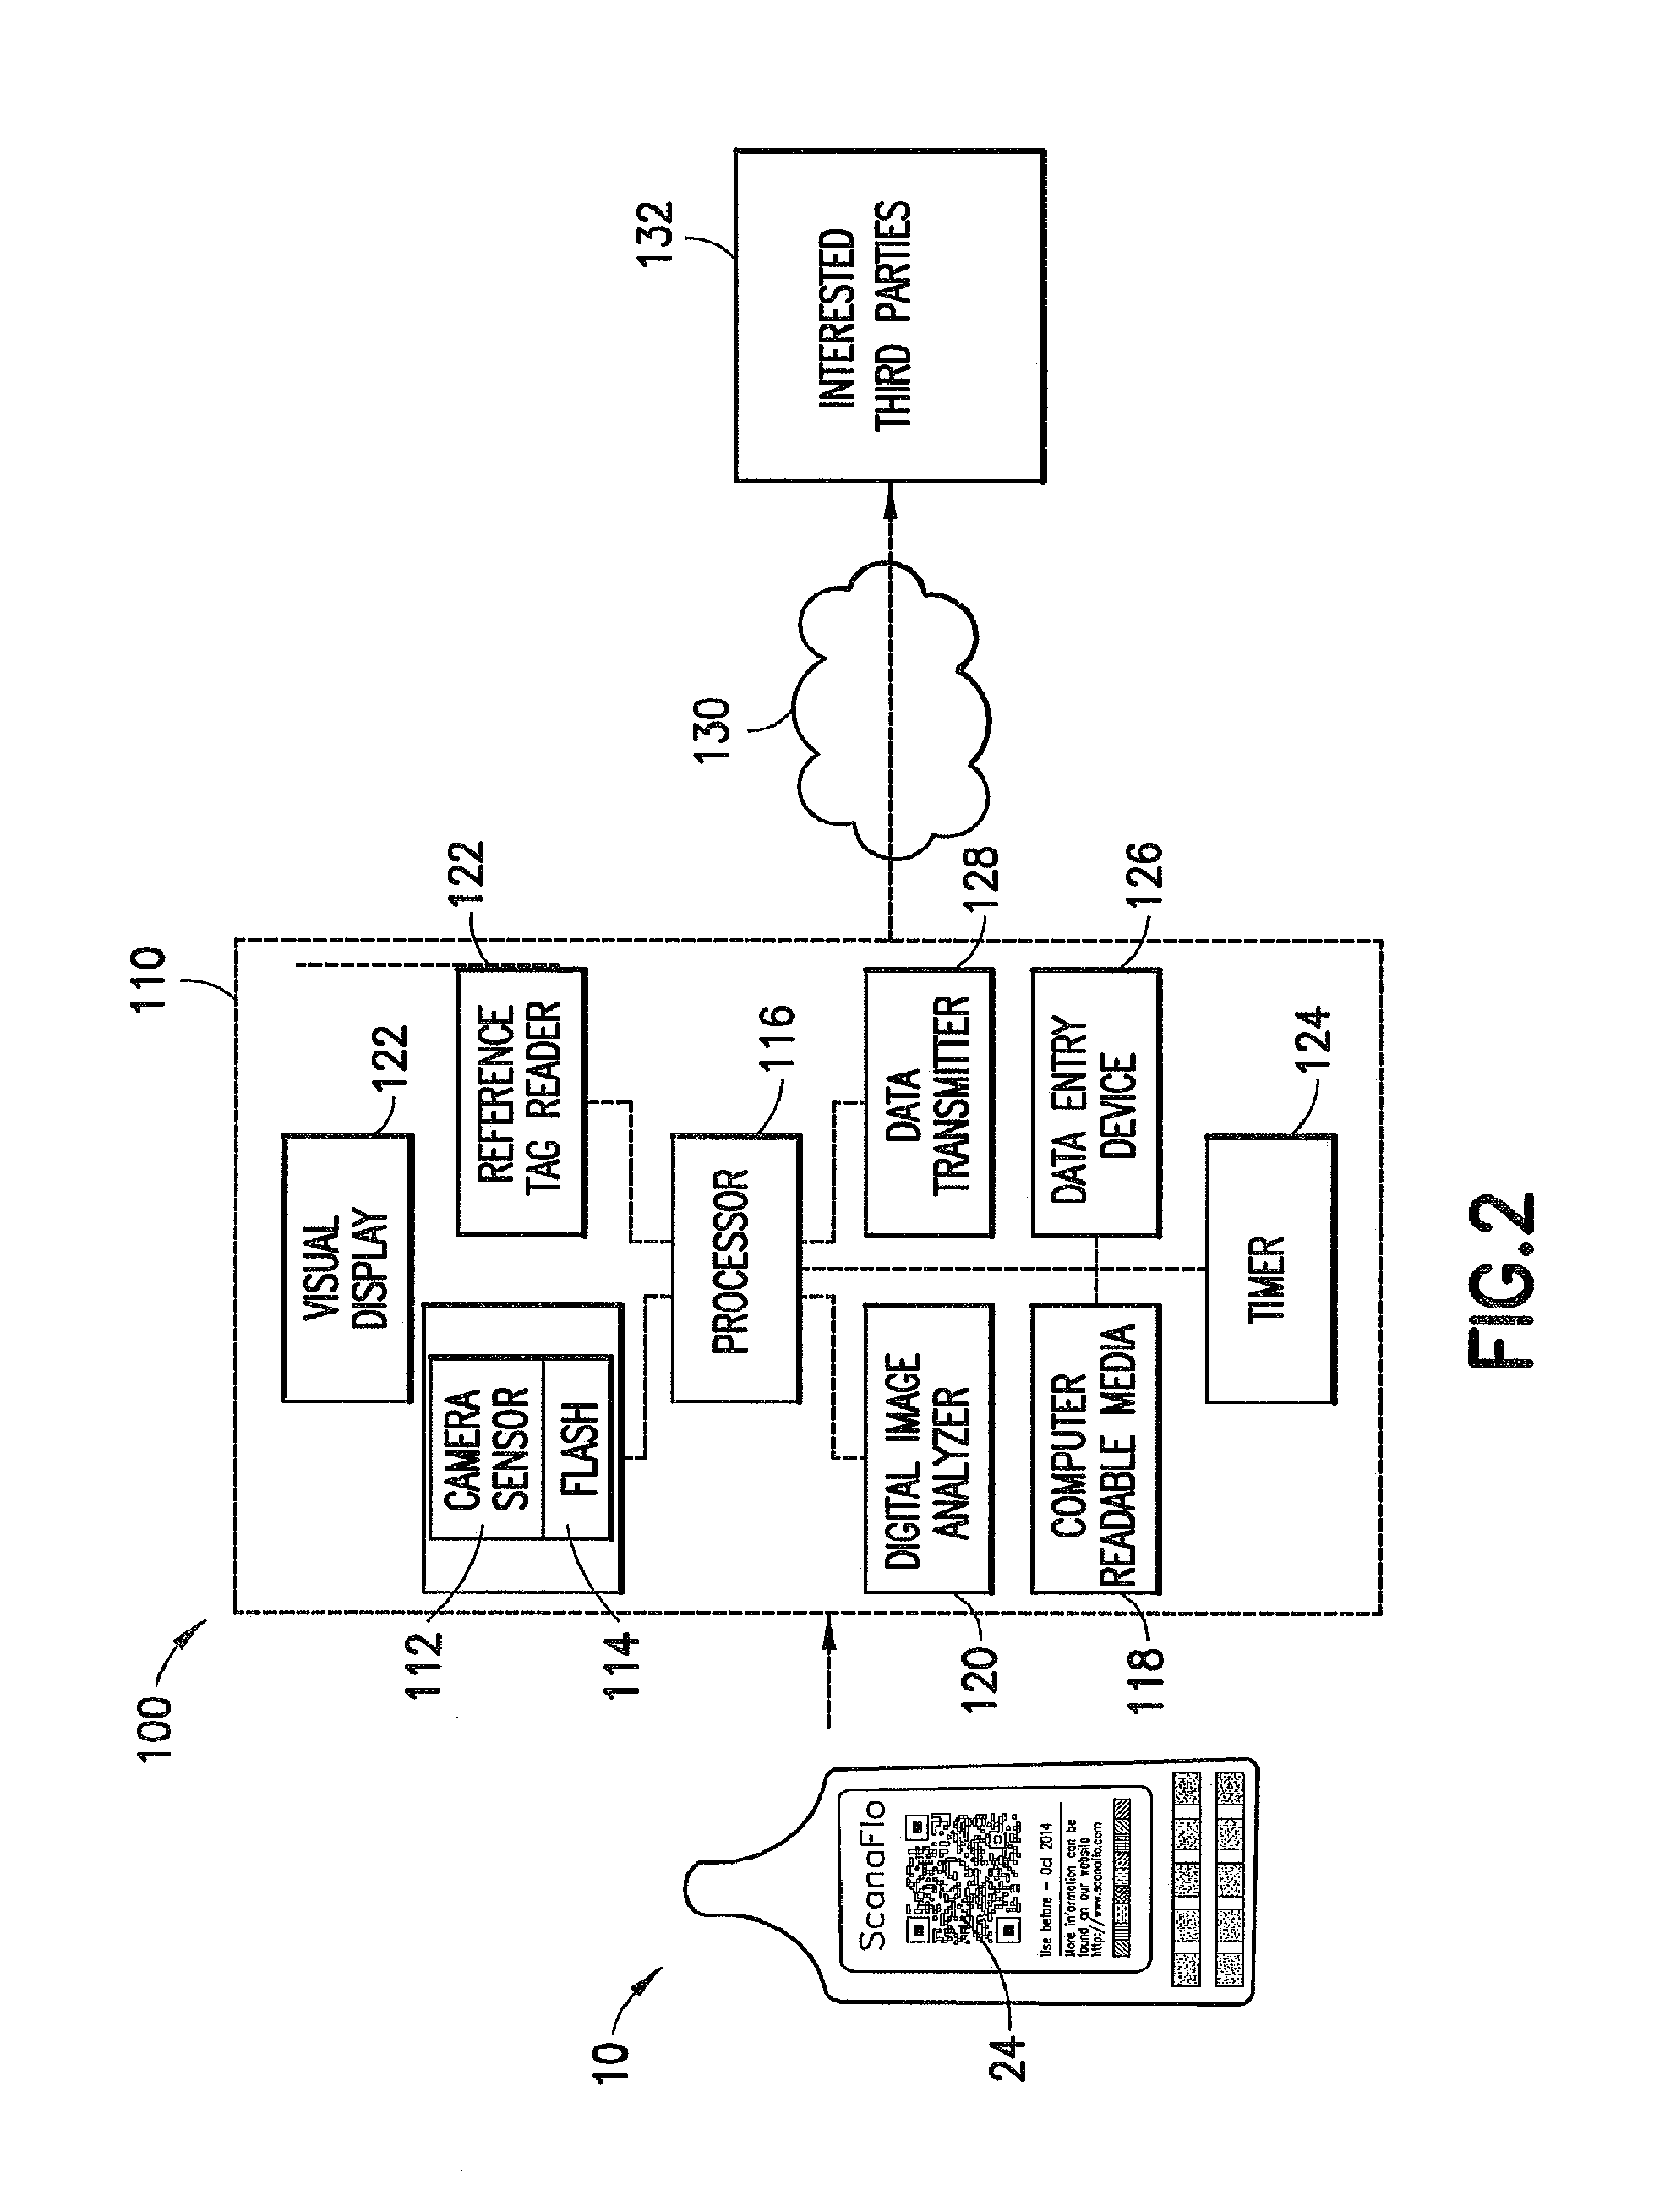 Method and apparatus for performing and quantifying color changes induced by specific concentrations of biological analytes in an automatically calibrated environment